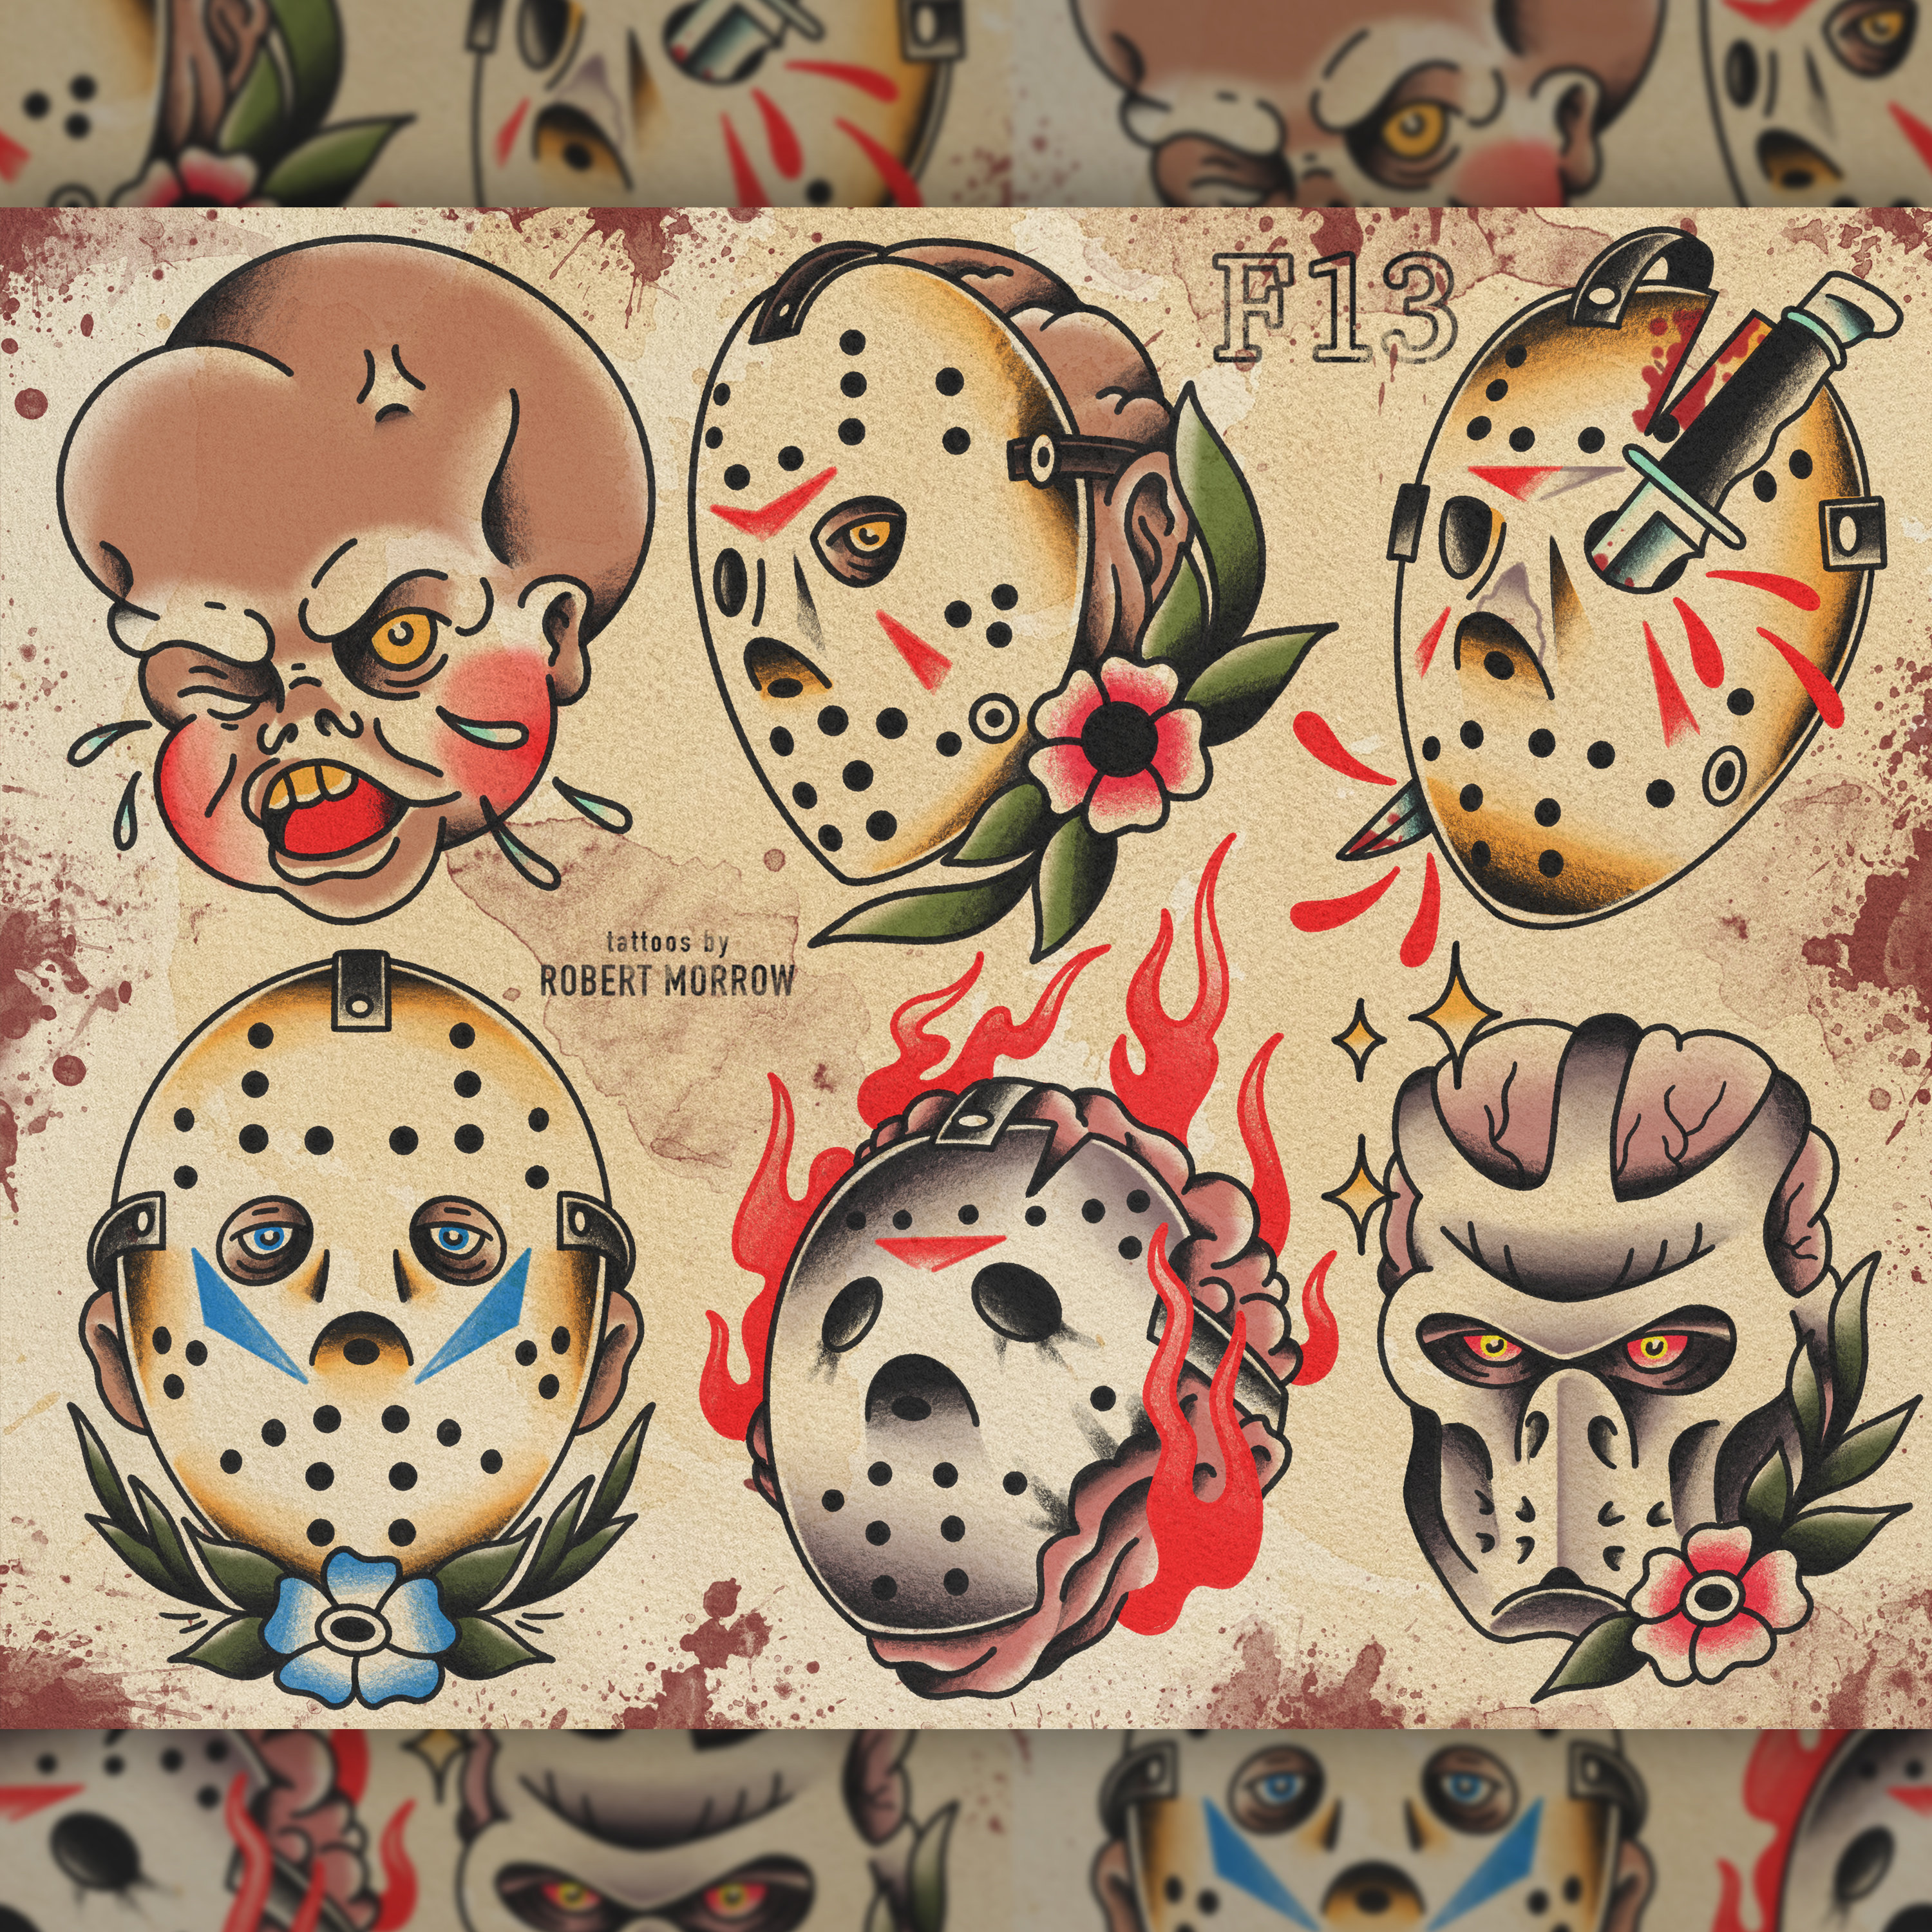 Tattoo Shops In New Orleans Offering Friday The 13th Tattoo Flash Sales   Narcity